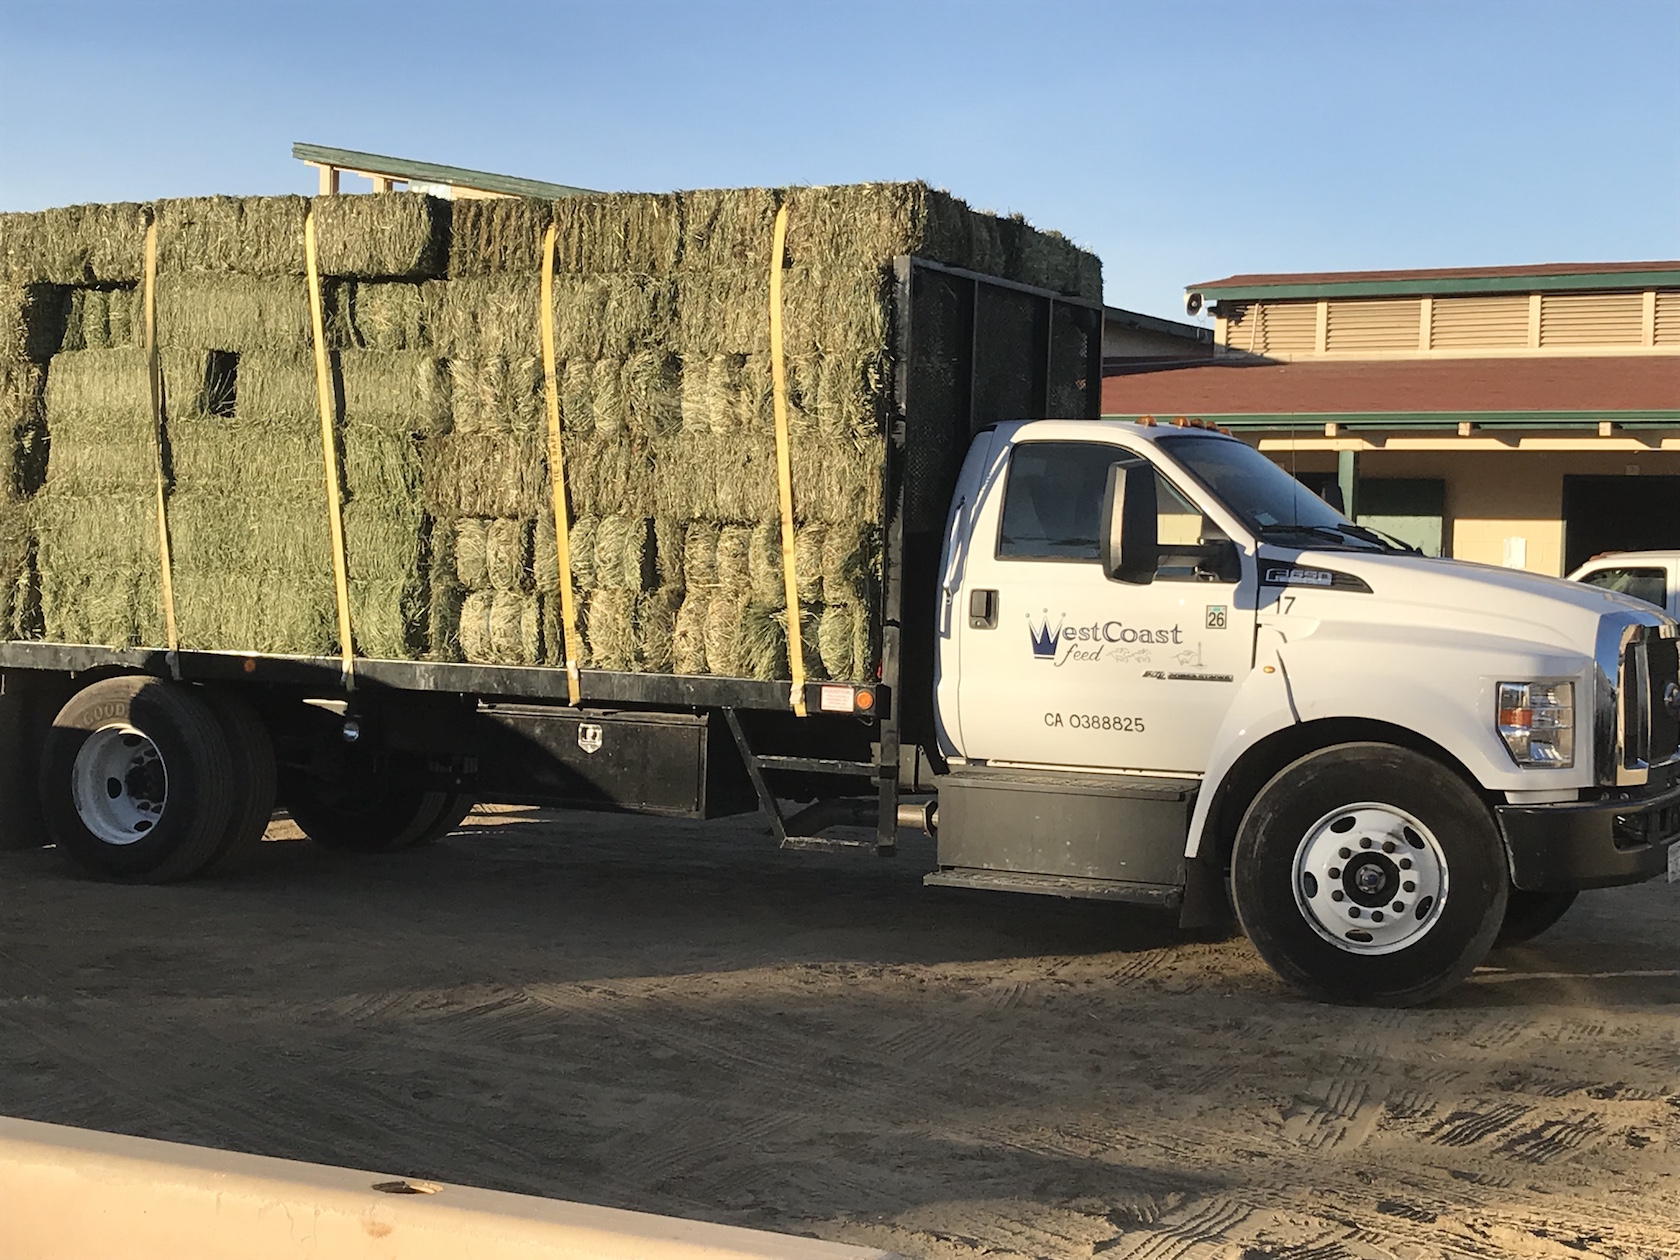 Truck-loads of hay from local feed companies were among the desperately needed supplies vanned in to Del Mar. Photo: Zoe Cadman